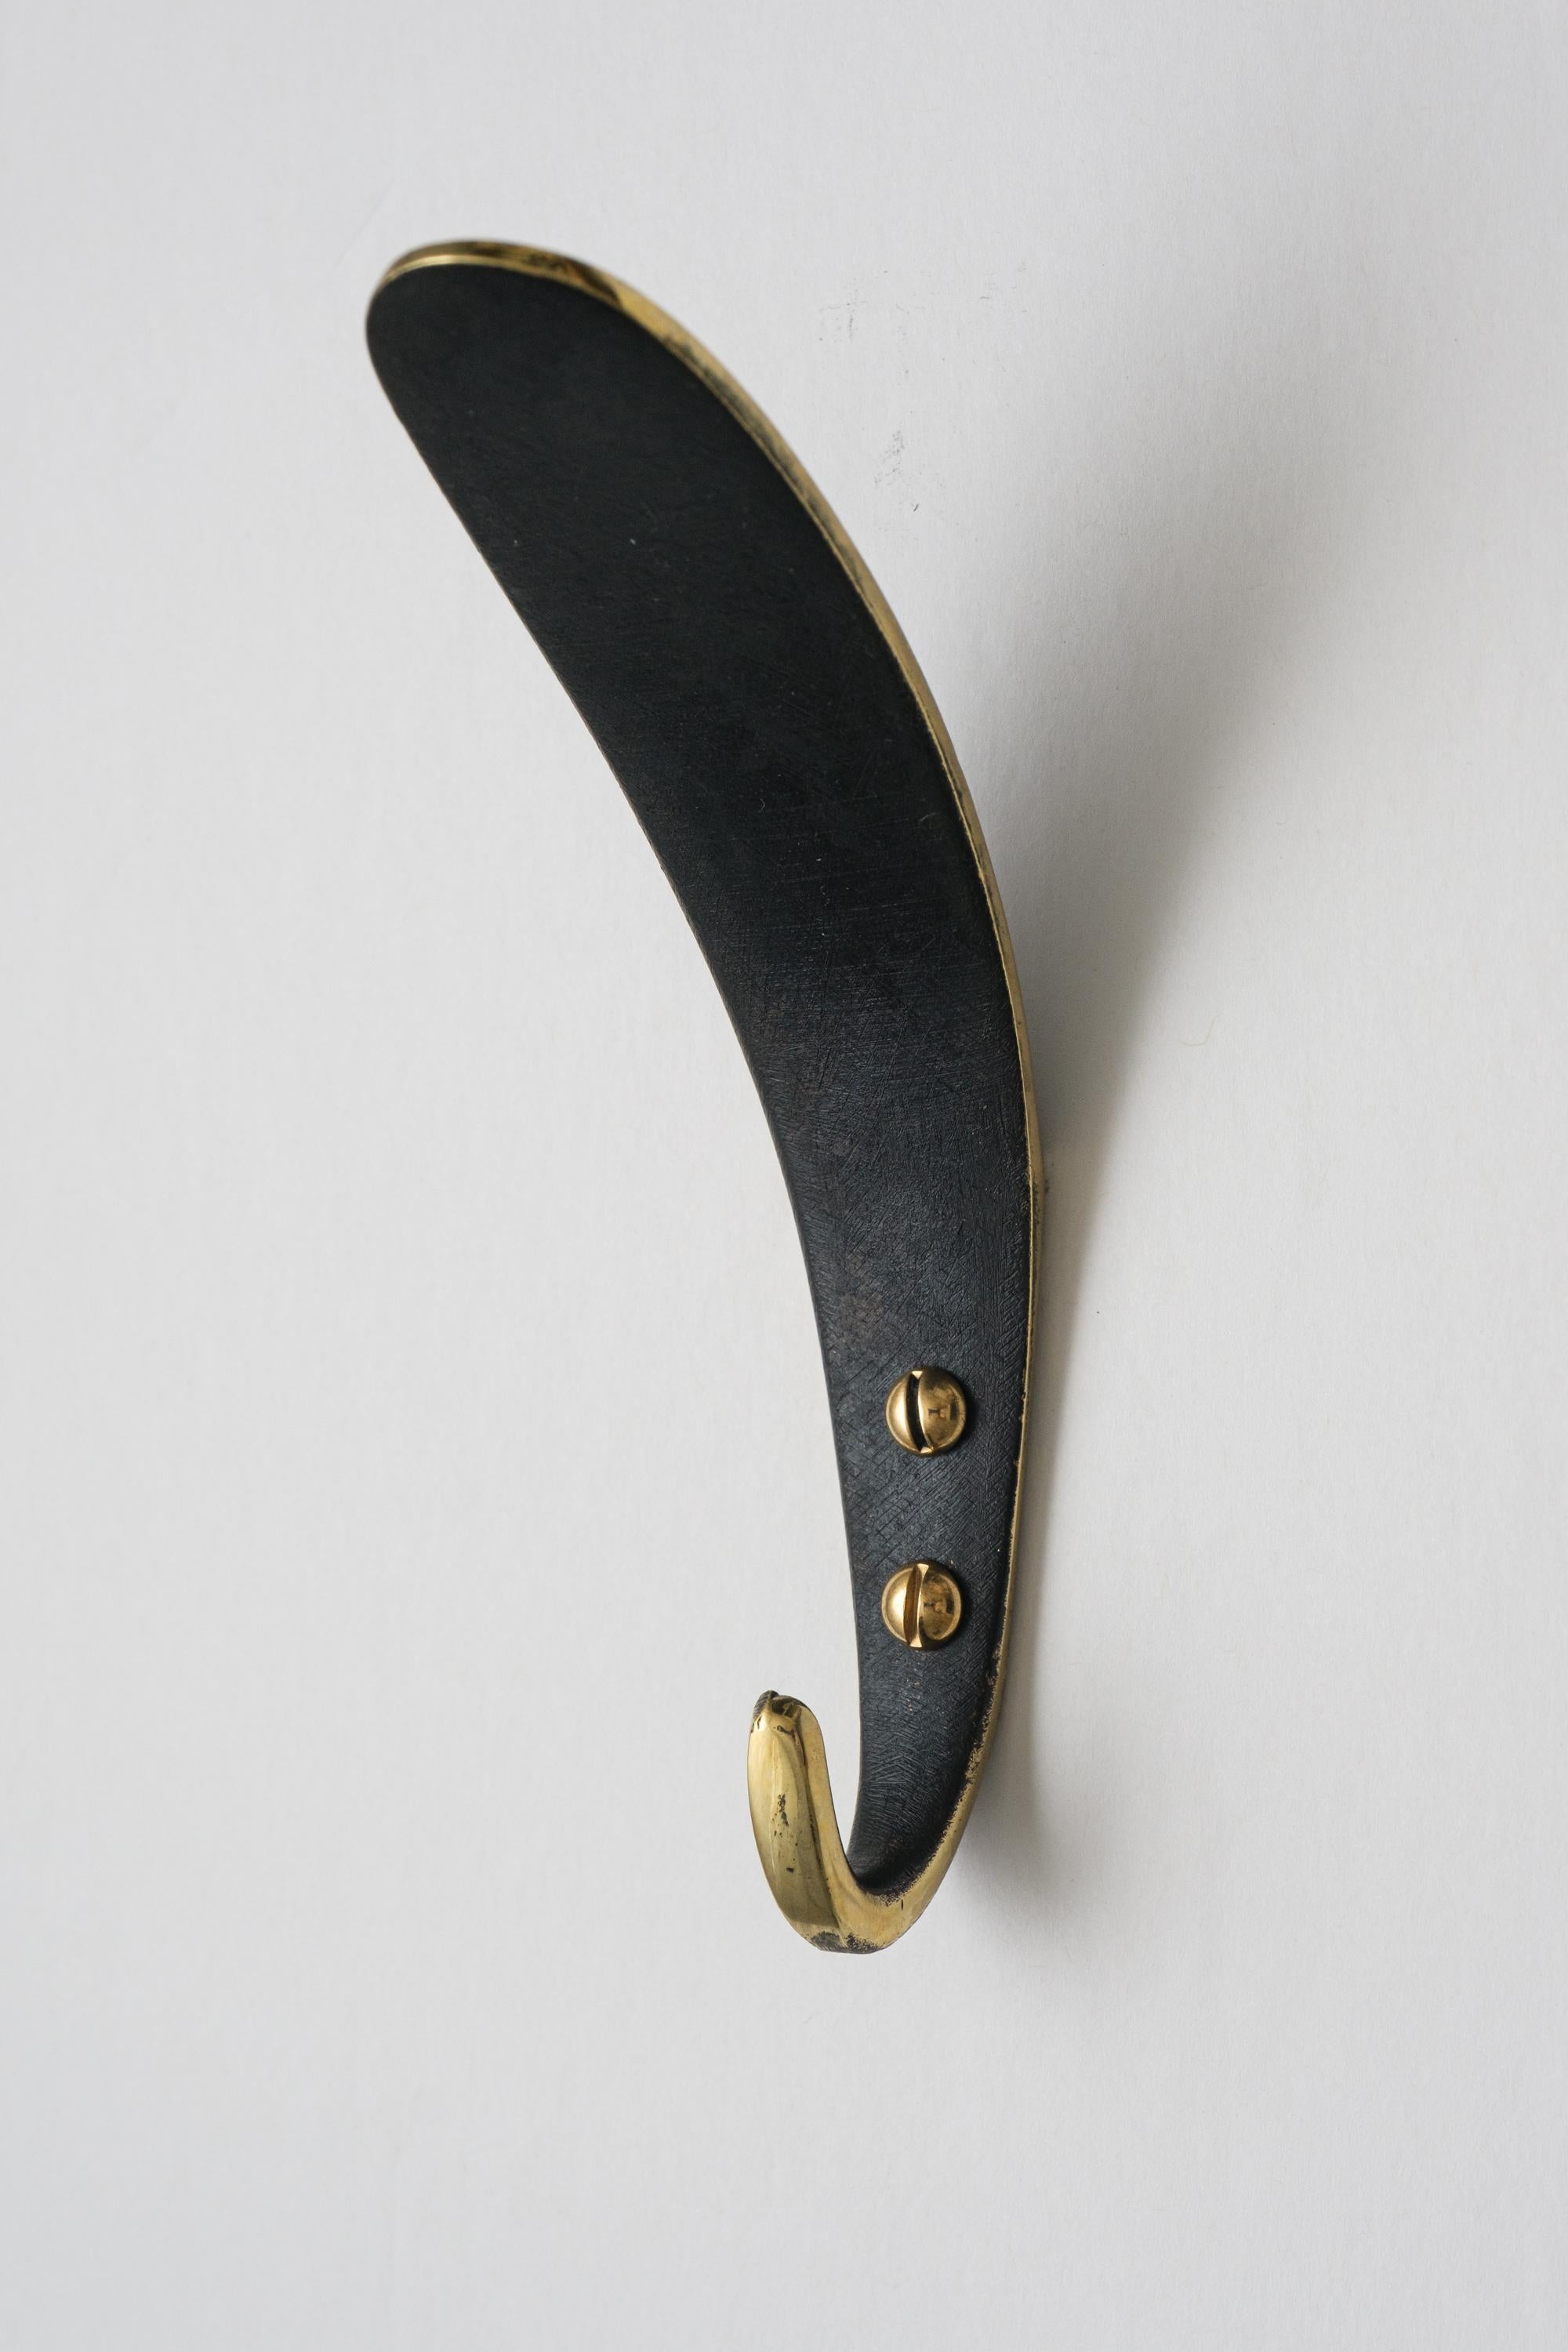 Carl Auböck Model #4327 patinated brass hook. Designed in the 1950s, this versatile and minimalist Viennese hook is executed in patinated and polished brass by Werkstätte Carl Auböck, Austria.

Produced by Carl Auböck IV in the original Auböck